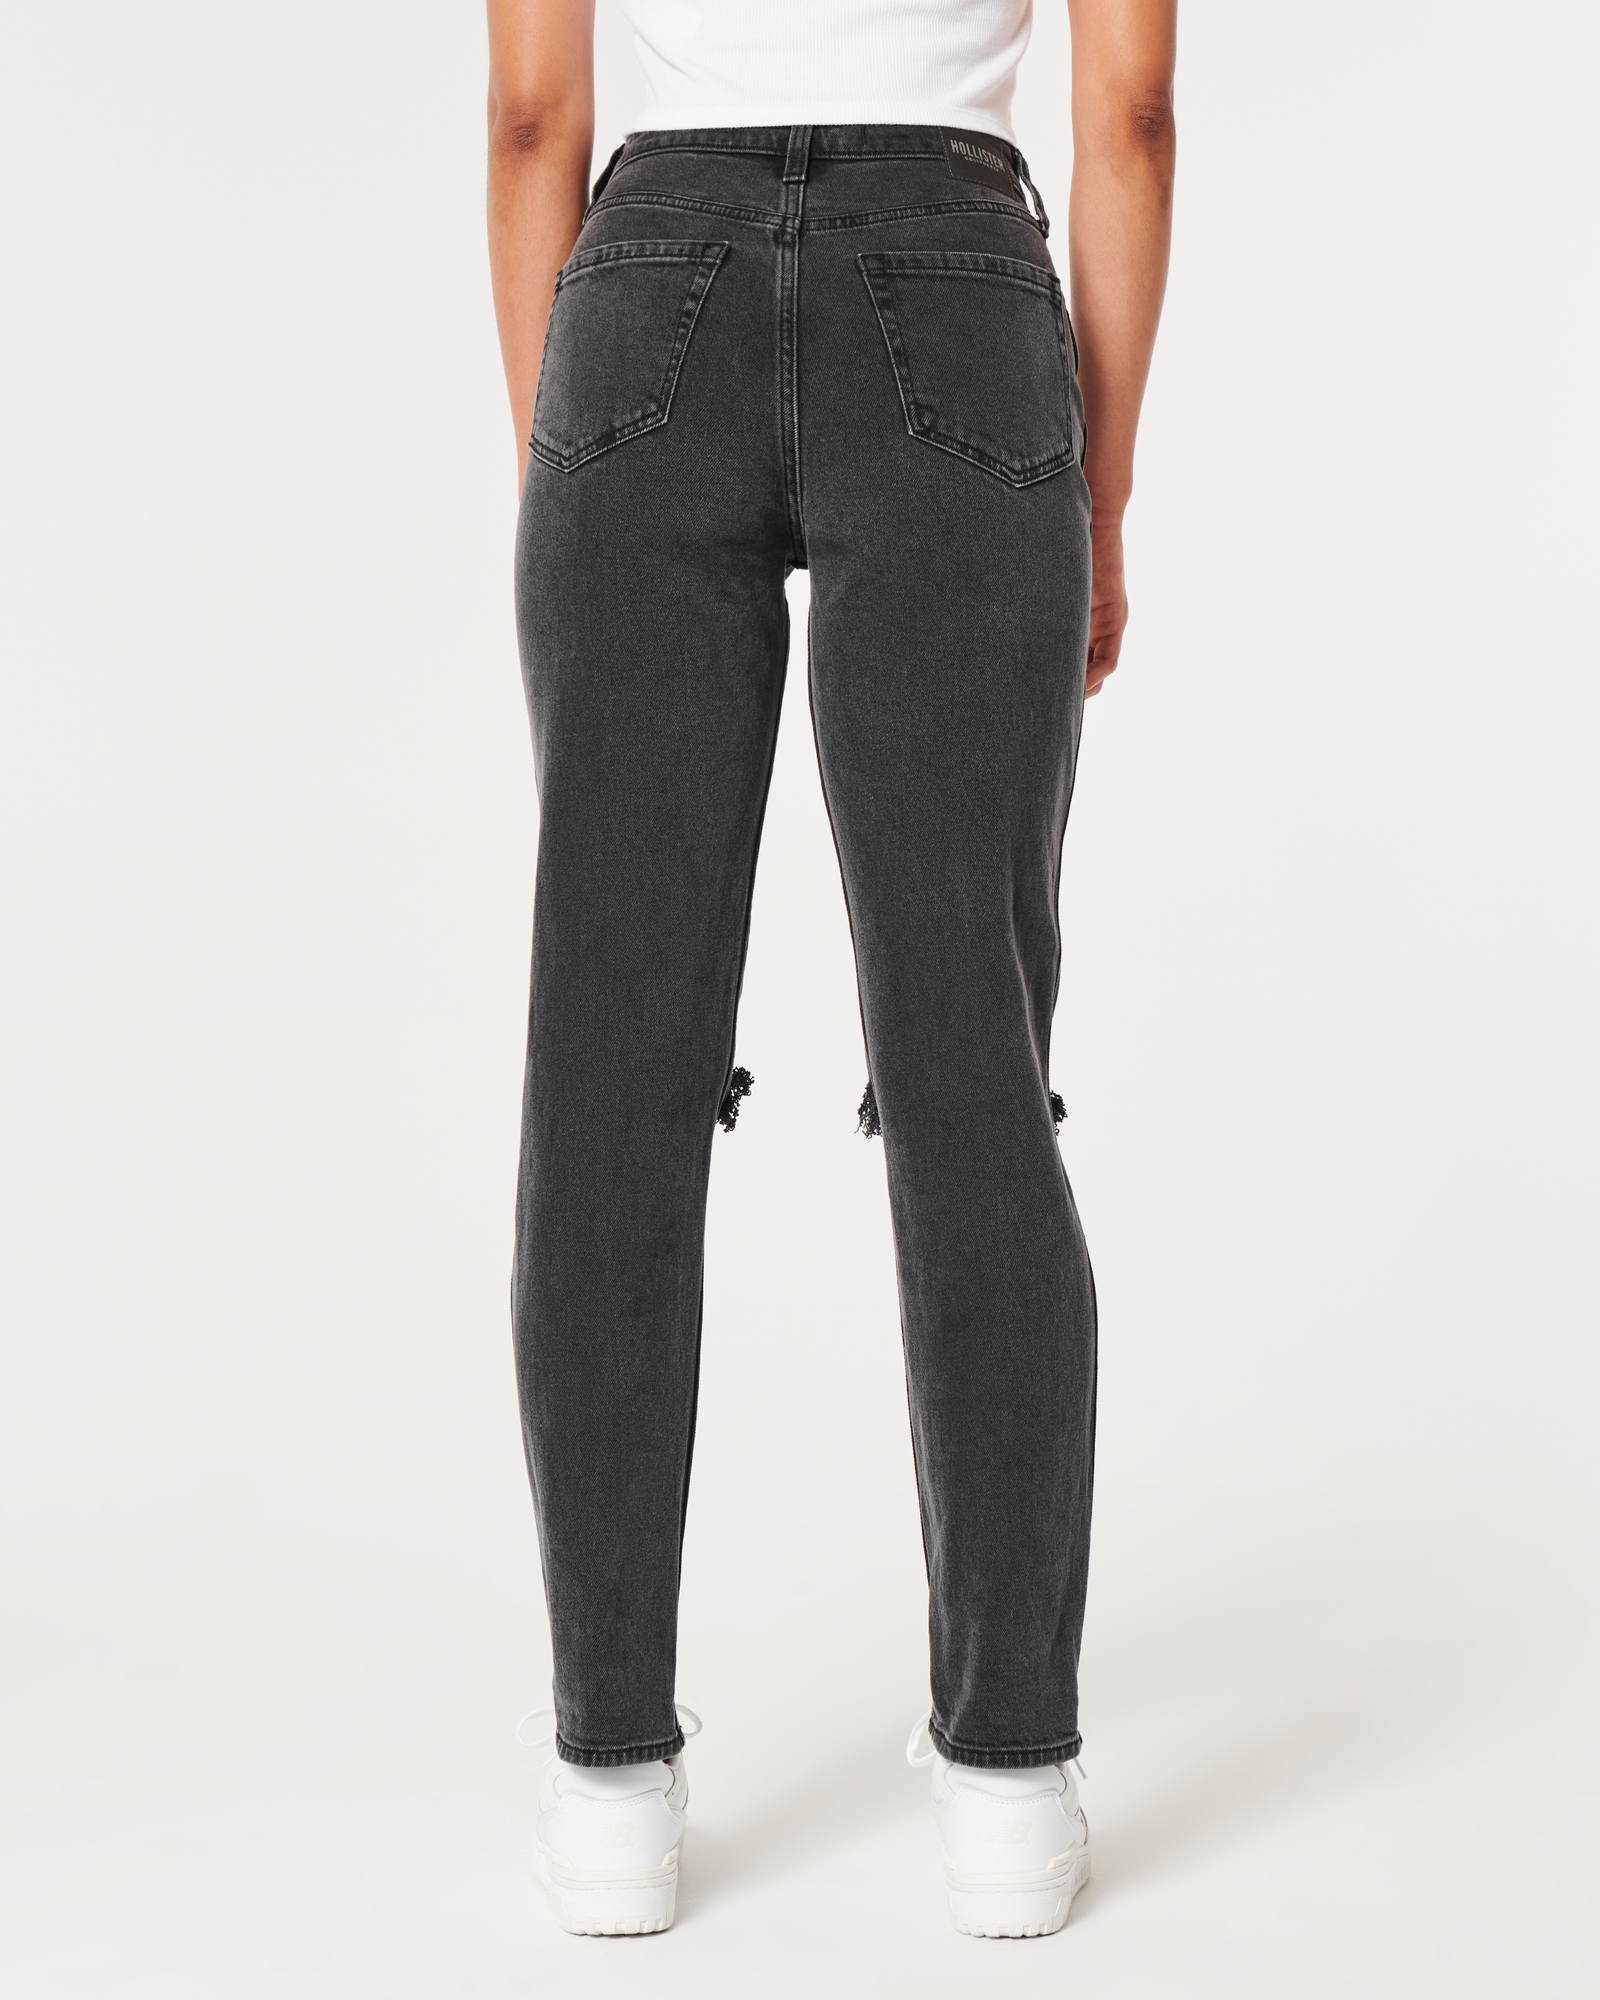 hollister mom jeans with rips!  Hollister mom jeans, Mom jeans, High rise mom  jeans